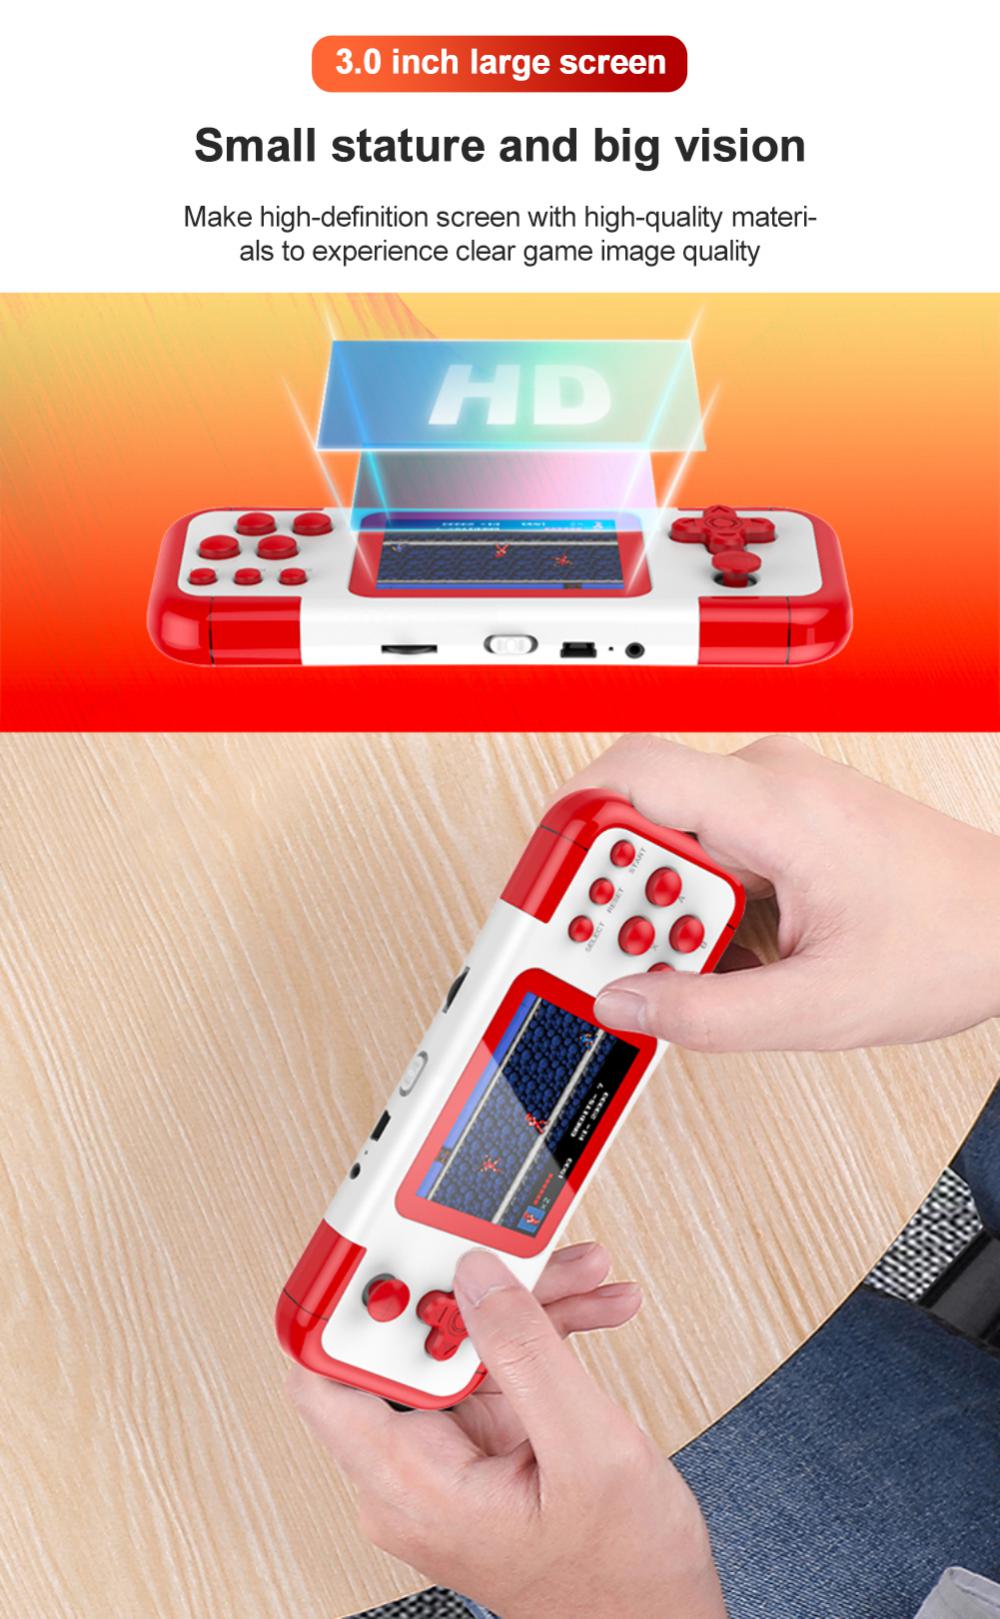 A12-30inch-TFT-HD-Color-Screen-Retro-Handheld-Game-Console-Built-in-666-Classic-Games-3D-Joystick-Po-1976539-8